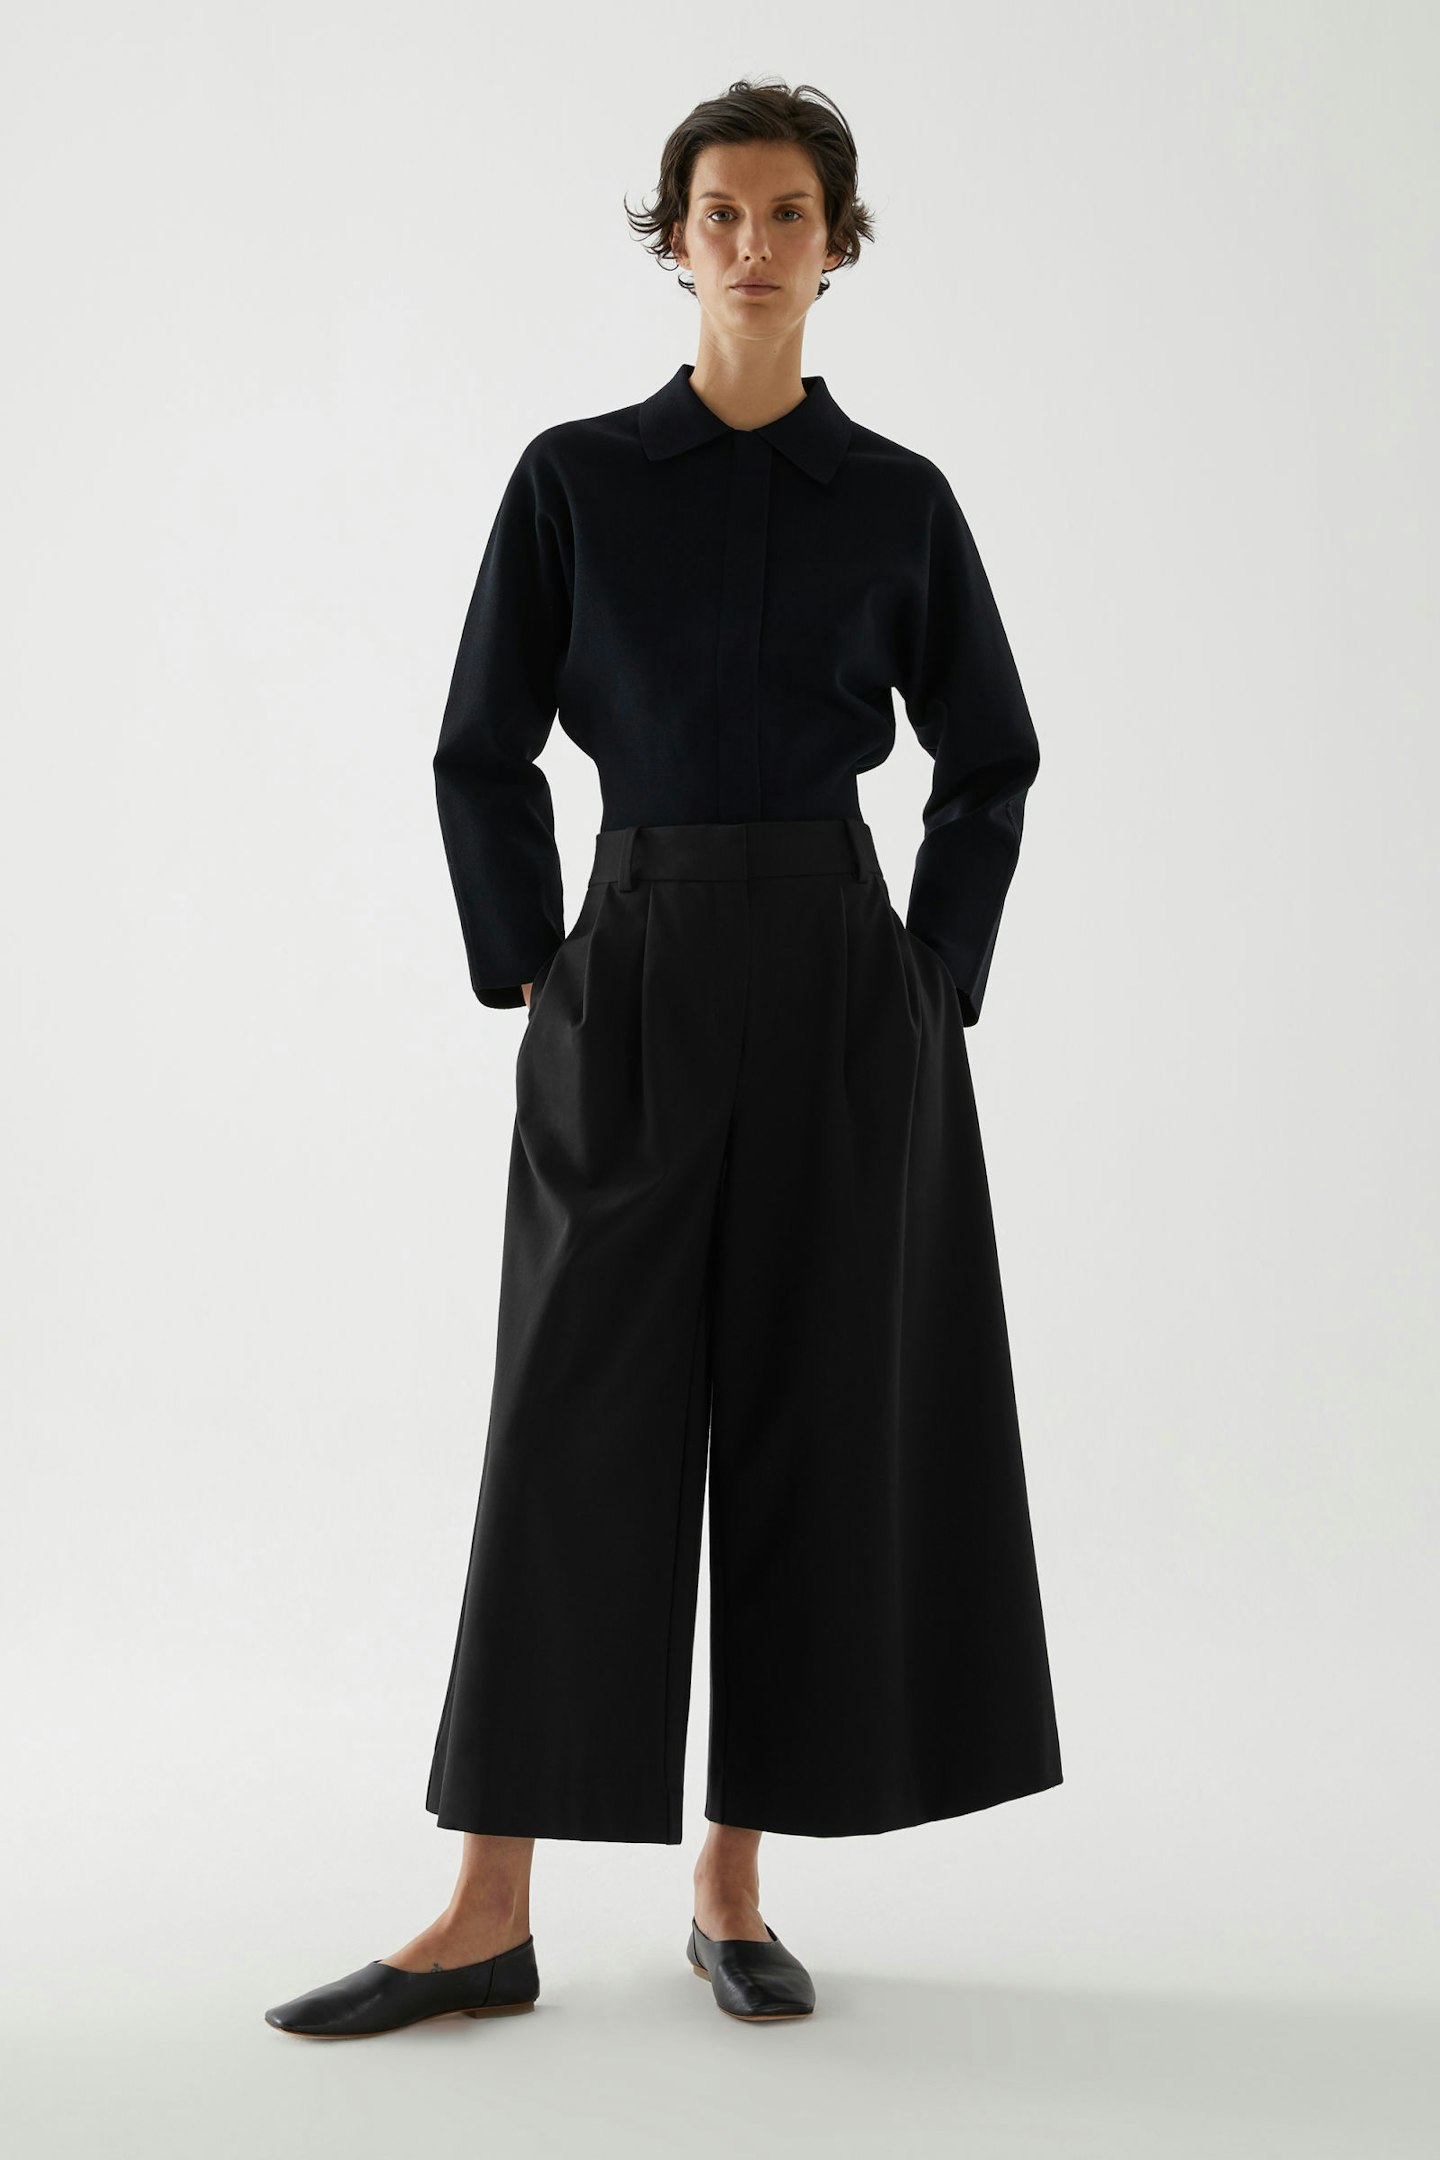 COS, Cotton Pleated Wide-Leg Trousers, £59